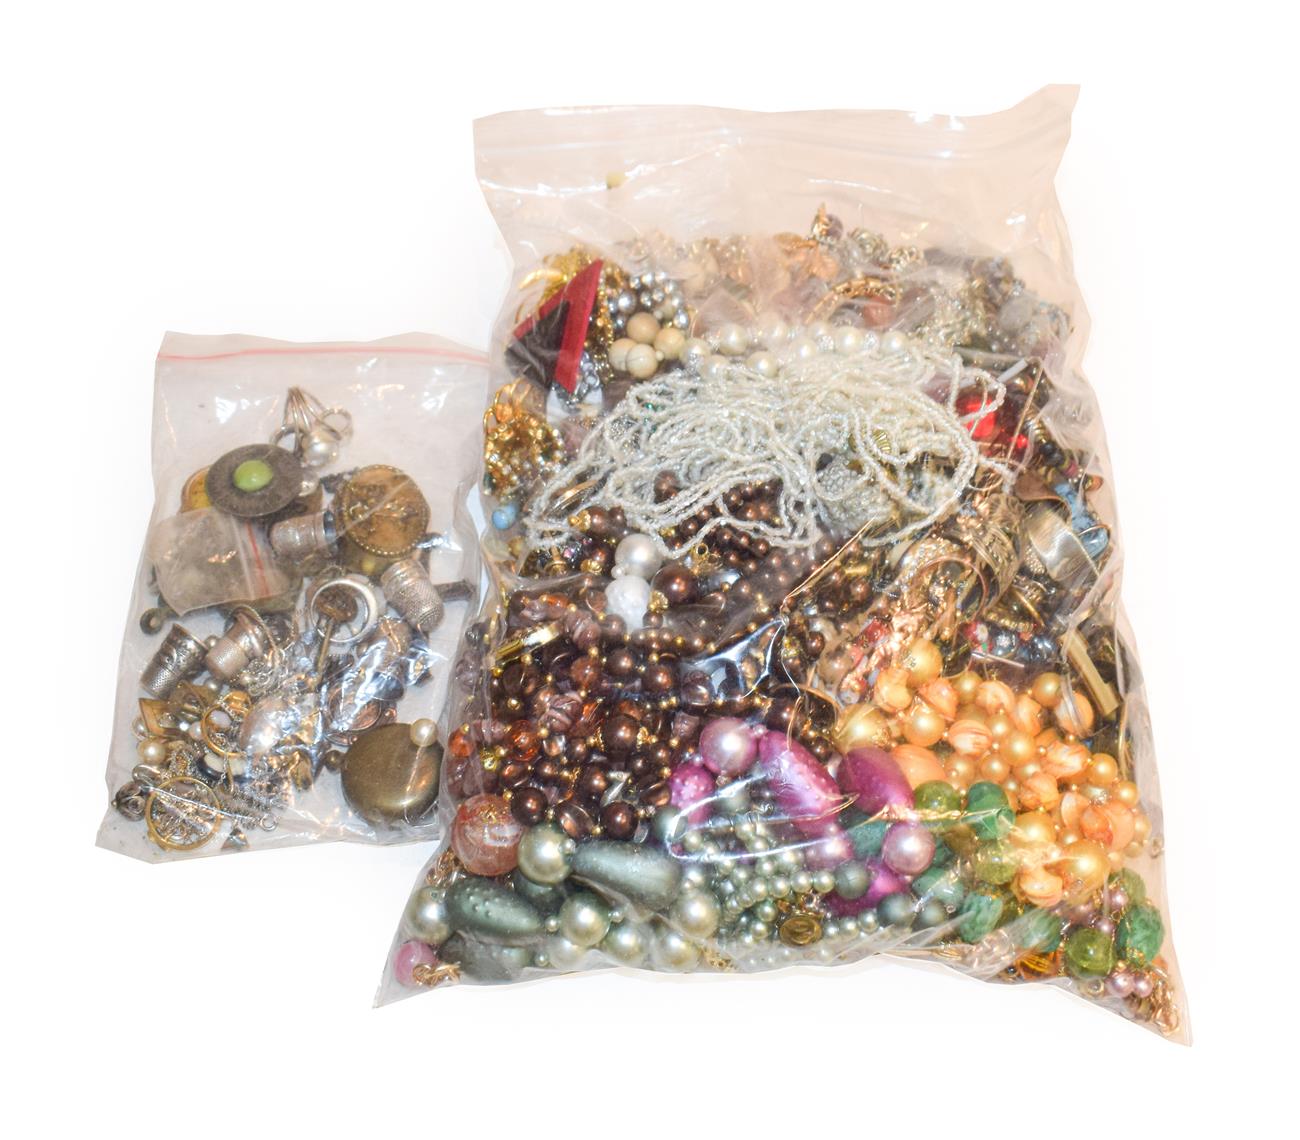 Lot 384 - Quantity of various costume and silver jewellery including beaded necklaces, rings, pendants etc